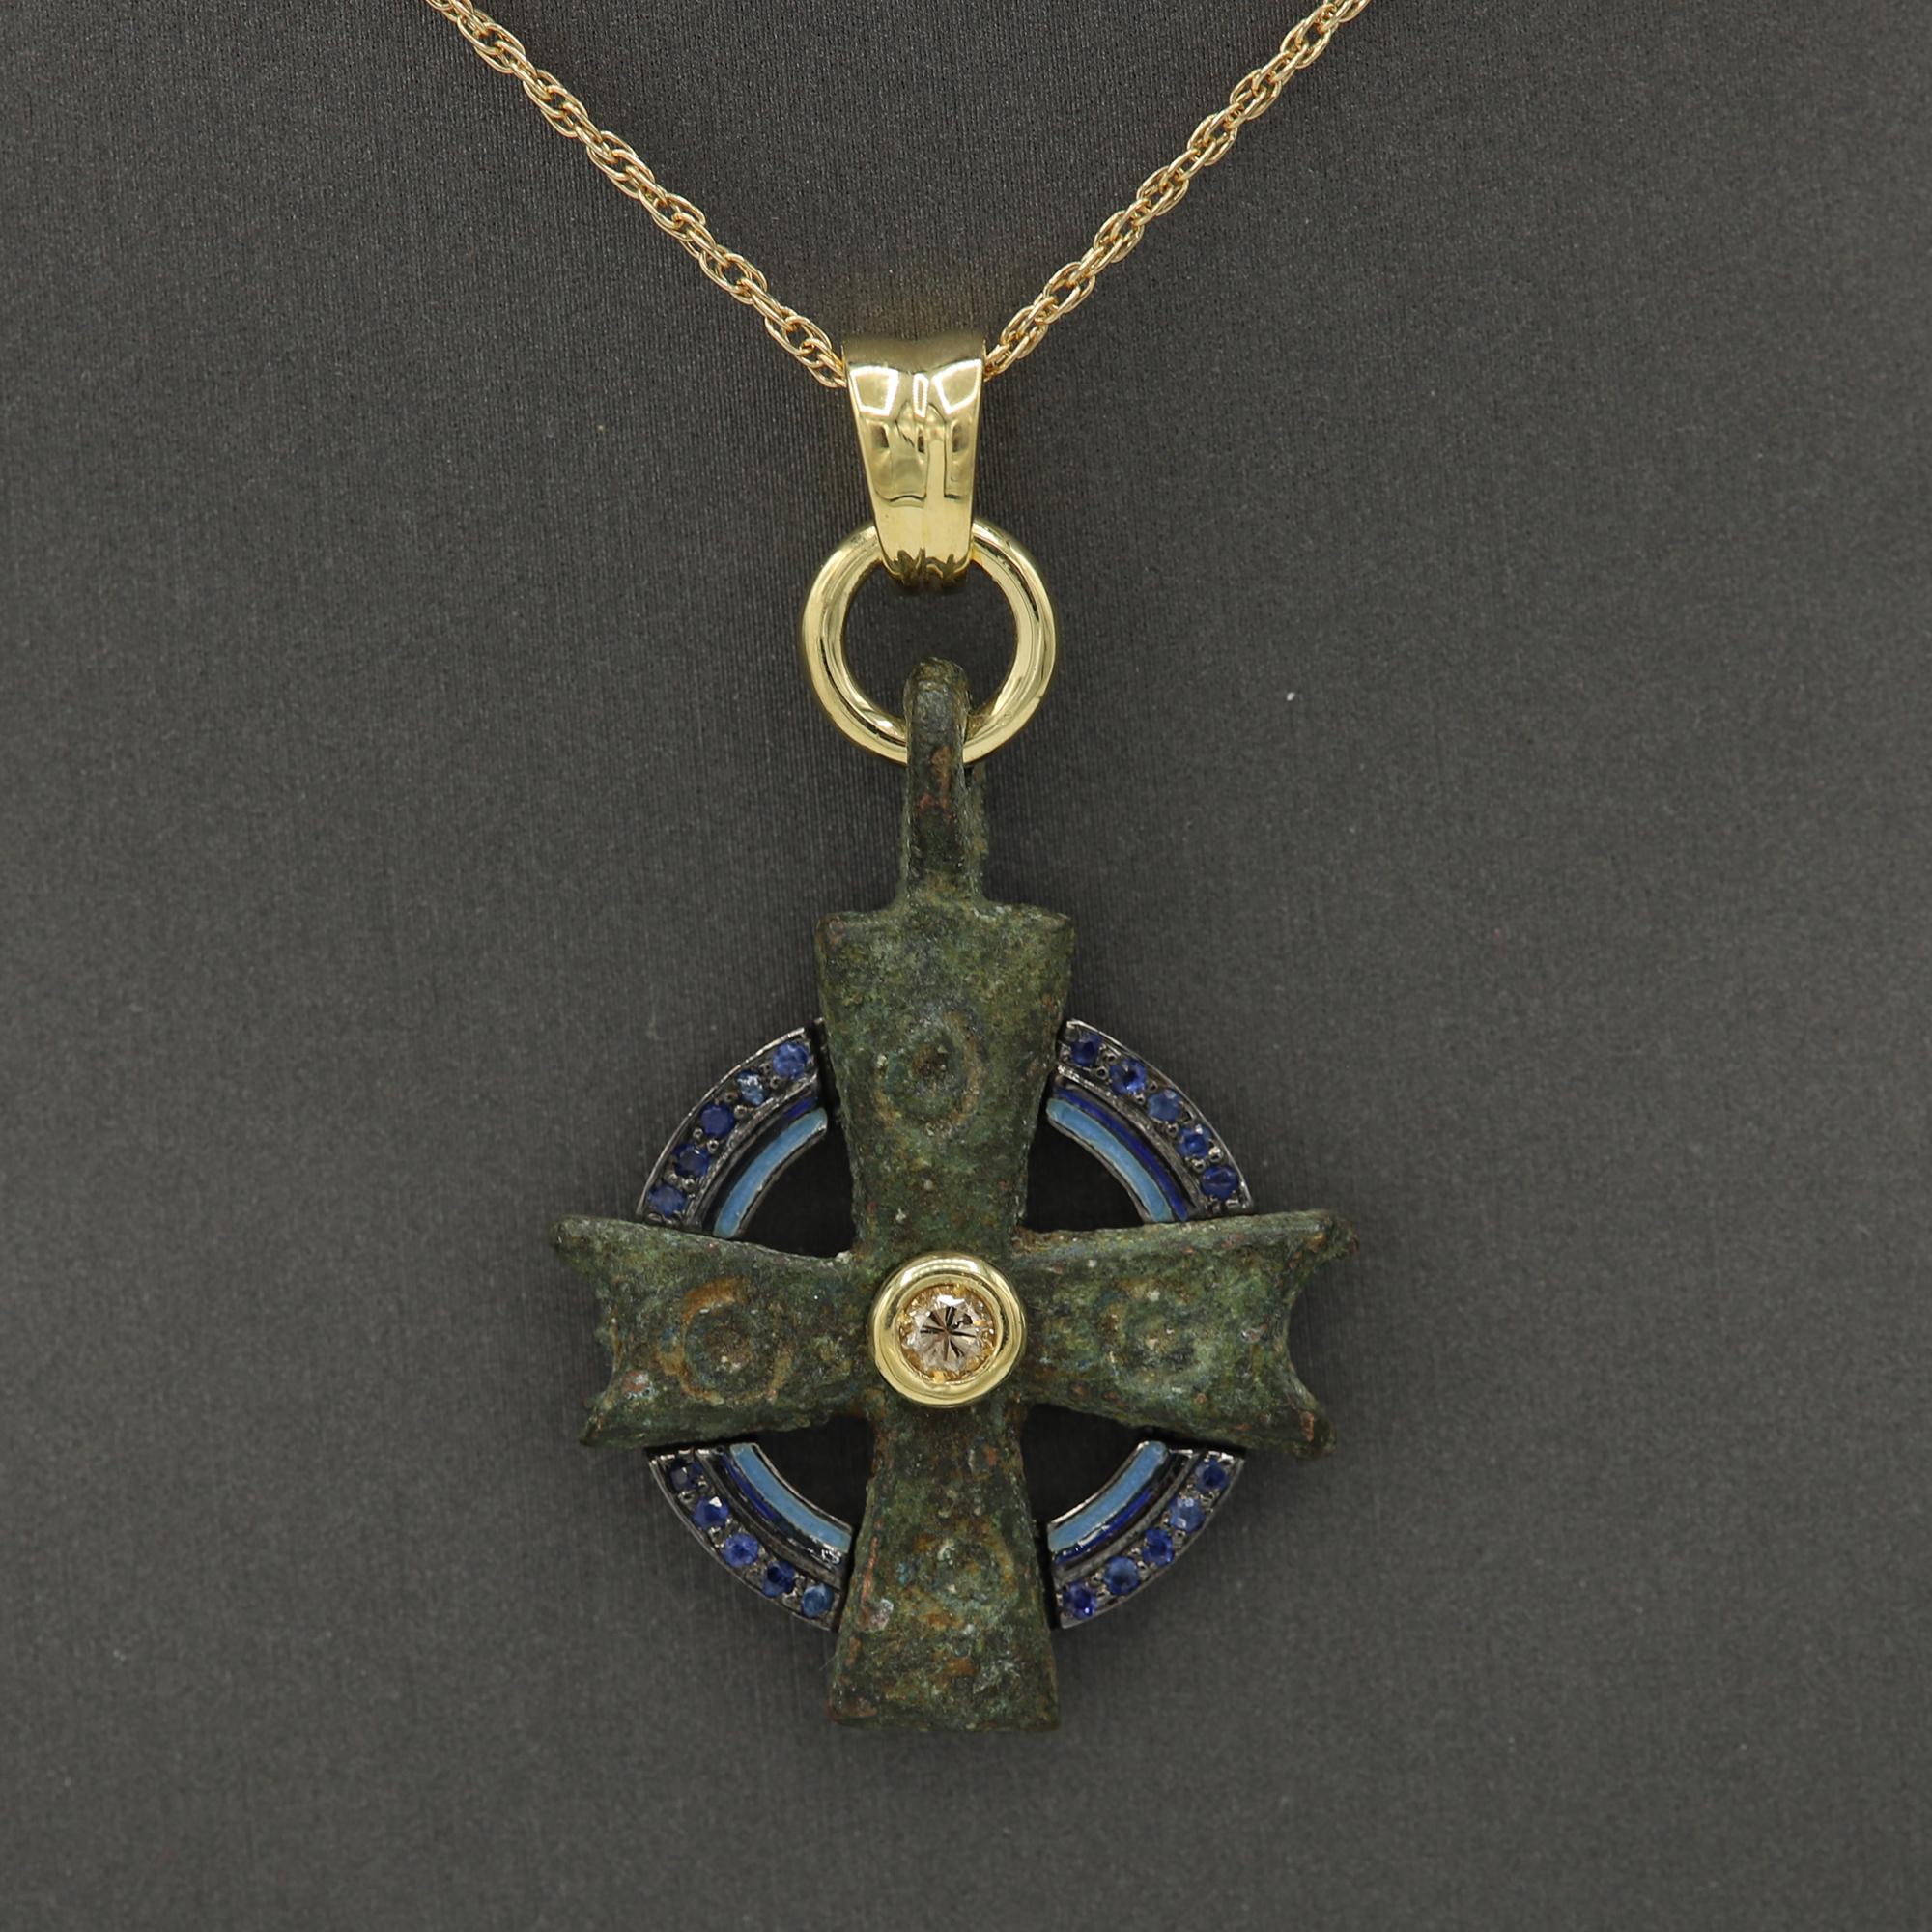 Magnificent piece of History - can be yours today !
Ancient Byzantine Period cross.
Hand set with 18k Yellow Gold and Sterling silver on the back side.
Hand Made in Spain. 
Approx size 1.5' inch or 30 mm.
With a center Diamond and Blue Sapphire gems